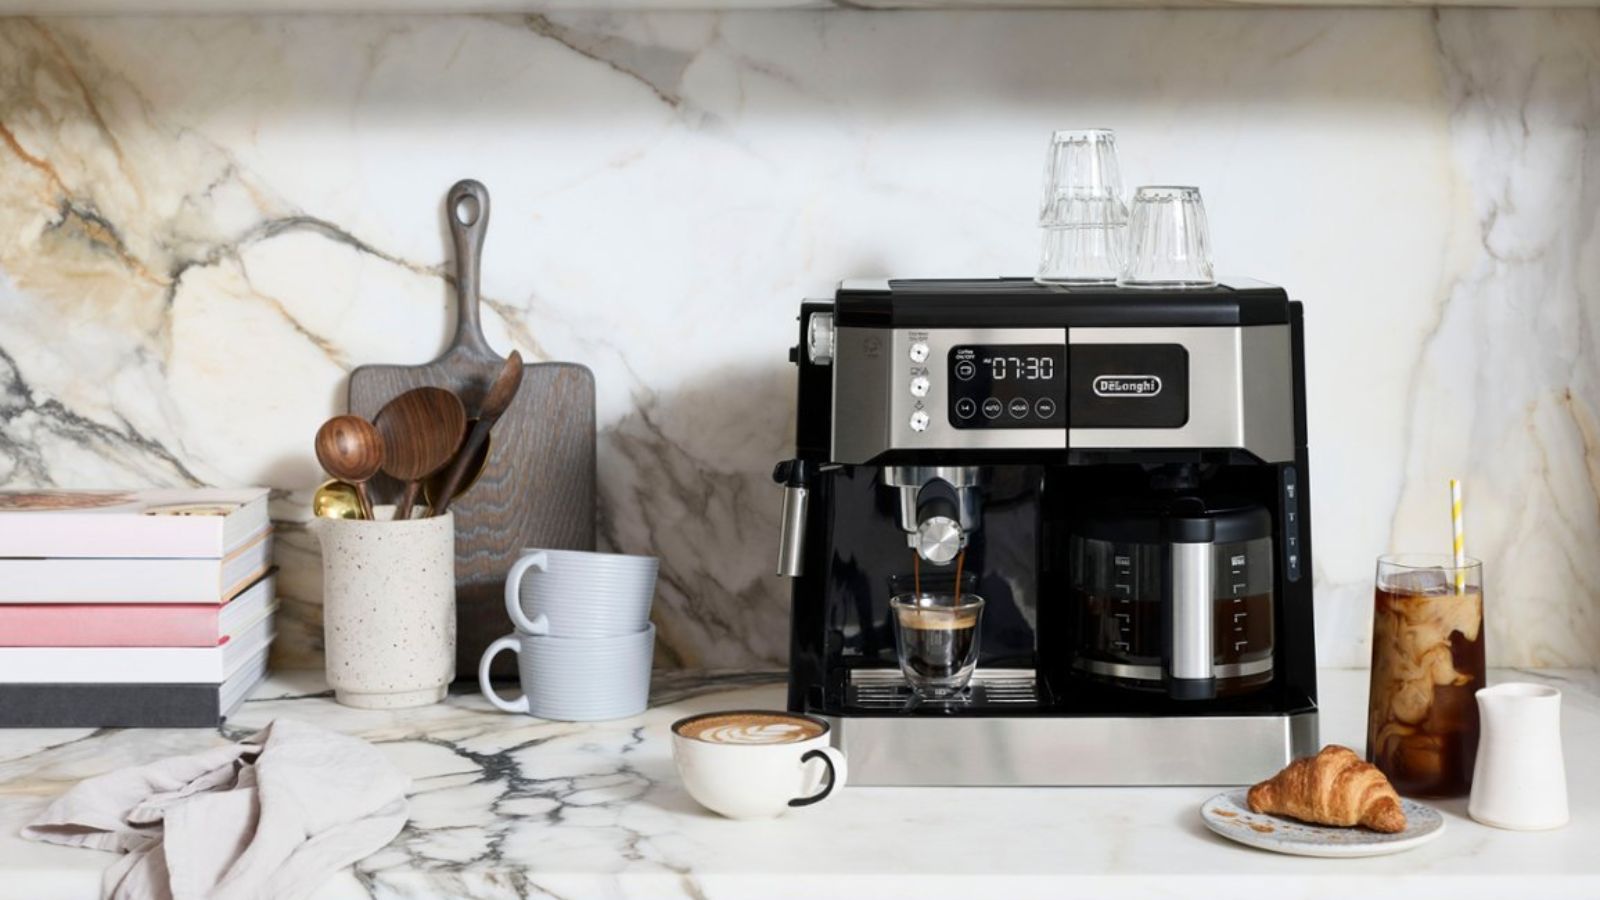 A Full Review of the Nespresso Vertuo Coffee Maker from QVC